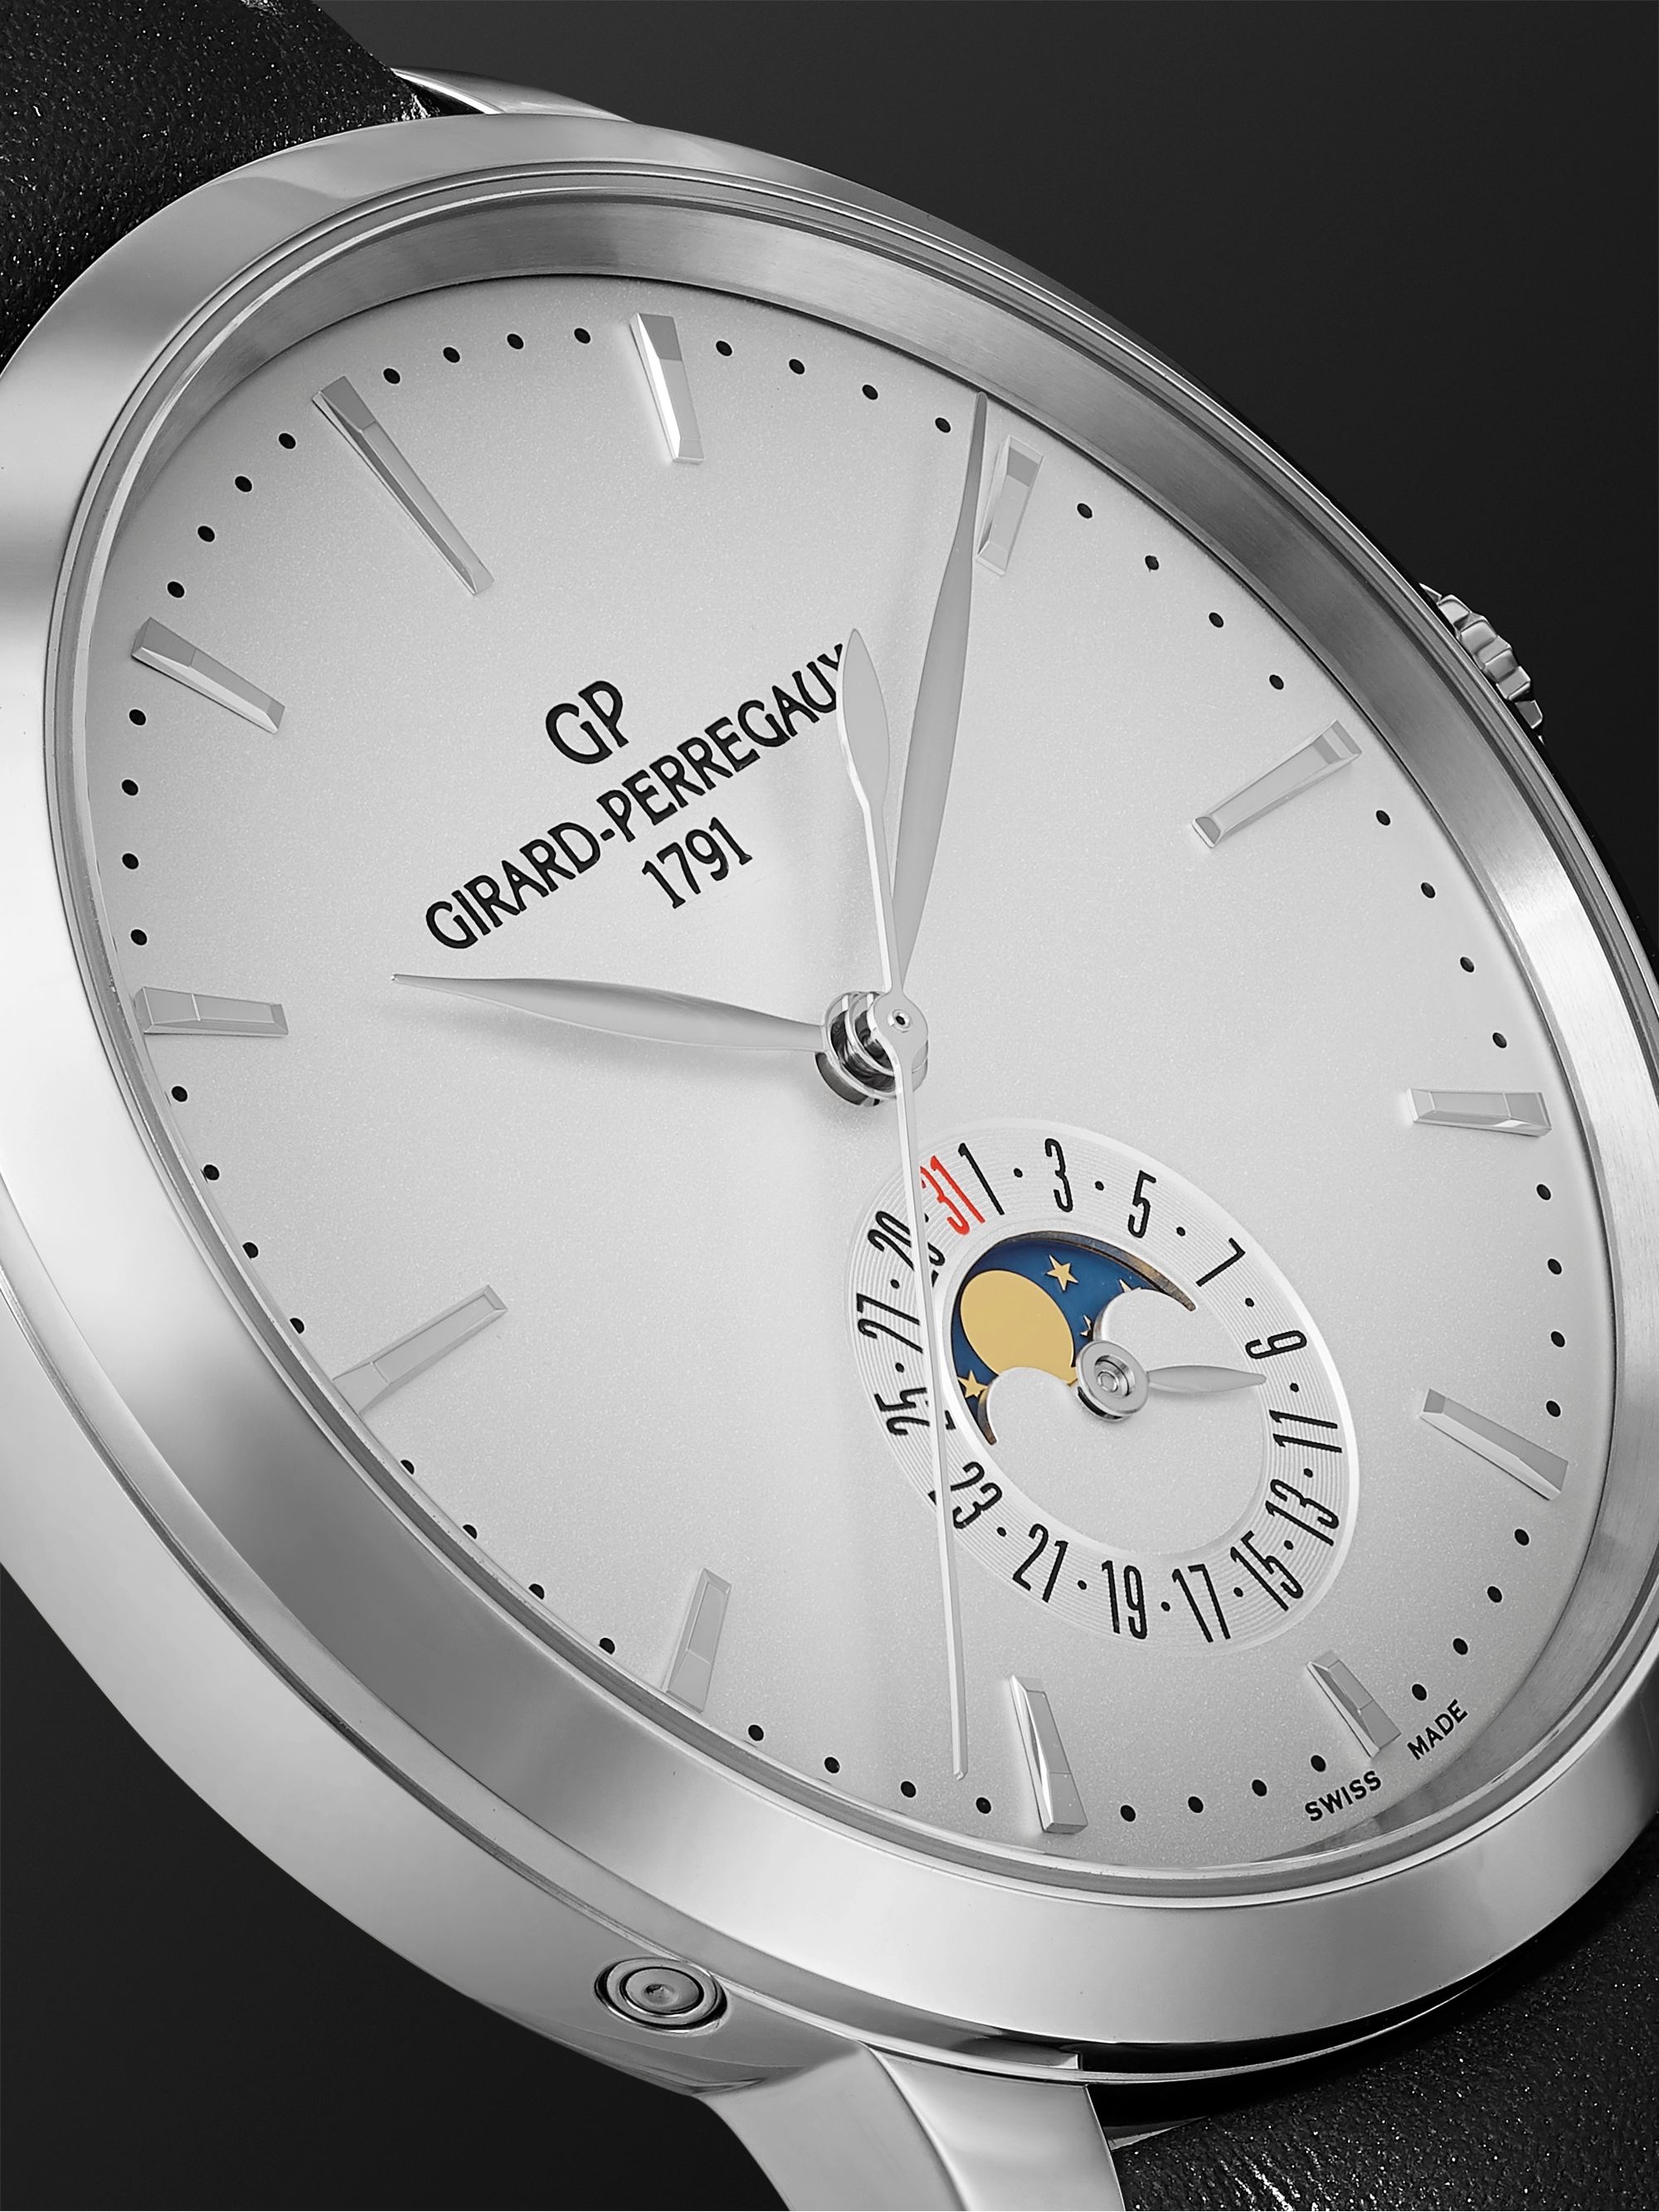 GIRARD-PERREGAUX 1966 Date and Moon Phases Automatic 40mm Stainless Steel and Leather Watch, Ref. No. 49545-11-131-BB60